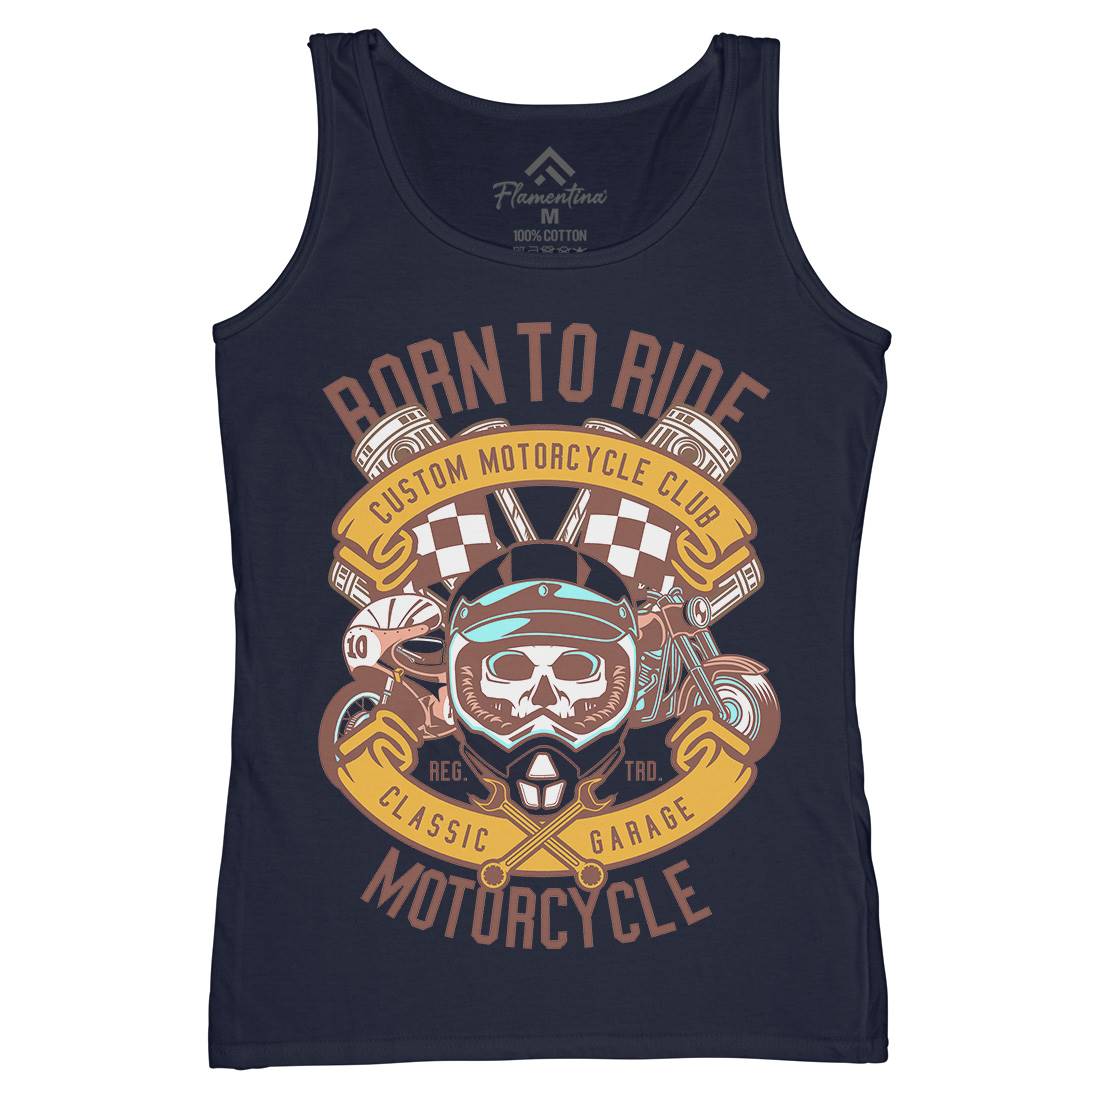 Born To Ride Womens Organic Tank Top Vest Motorcycles D509